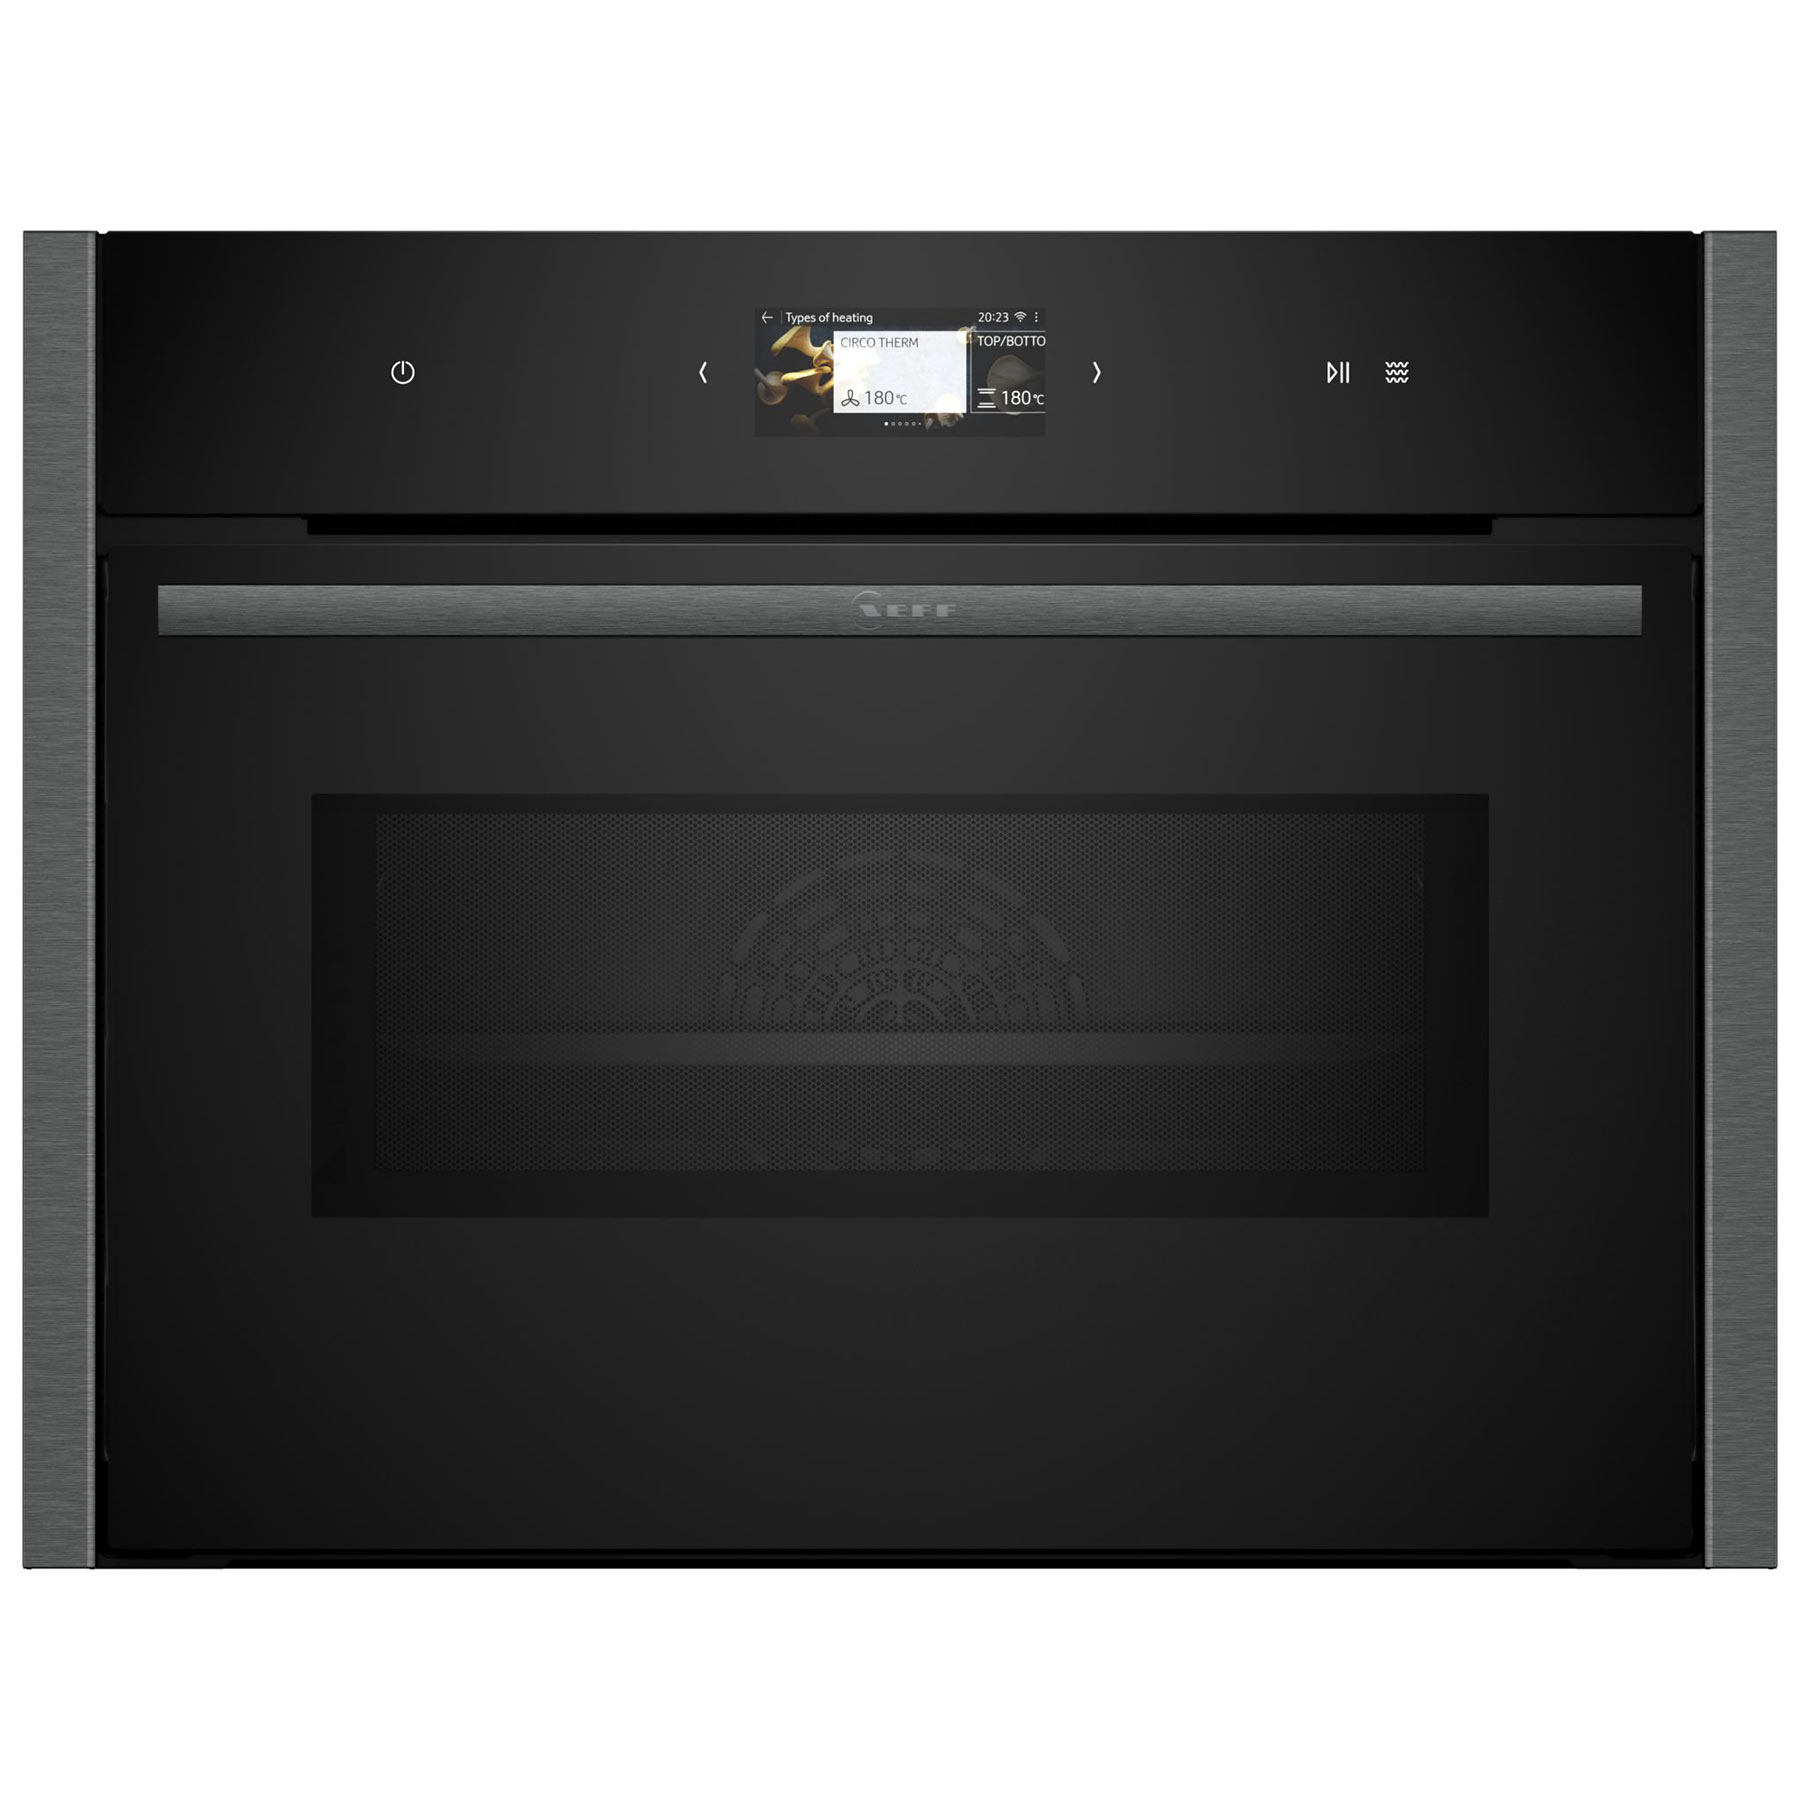 Image of Neff C24MS71G0B N90 Built In Compact Oven Microwave in Black 45L